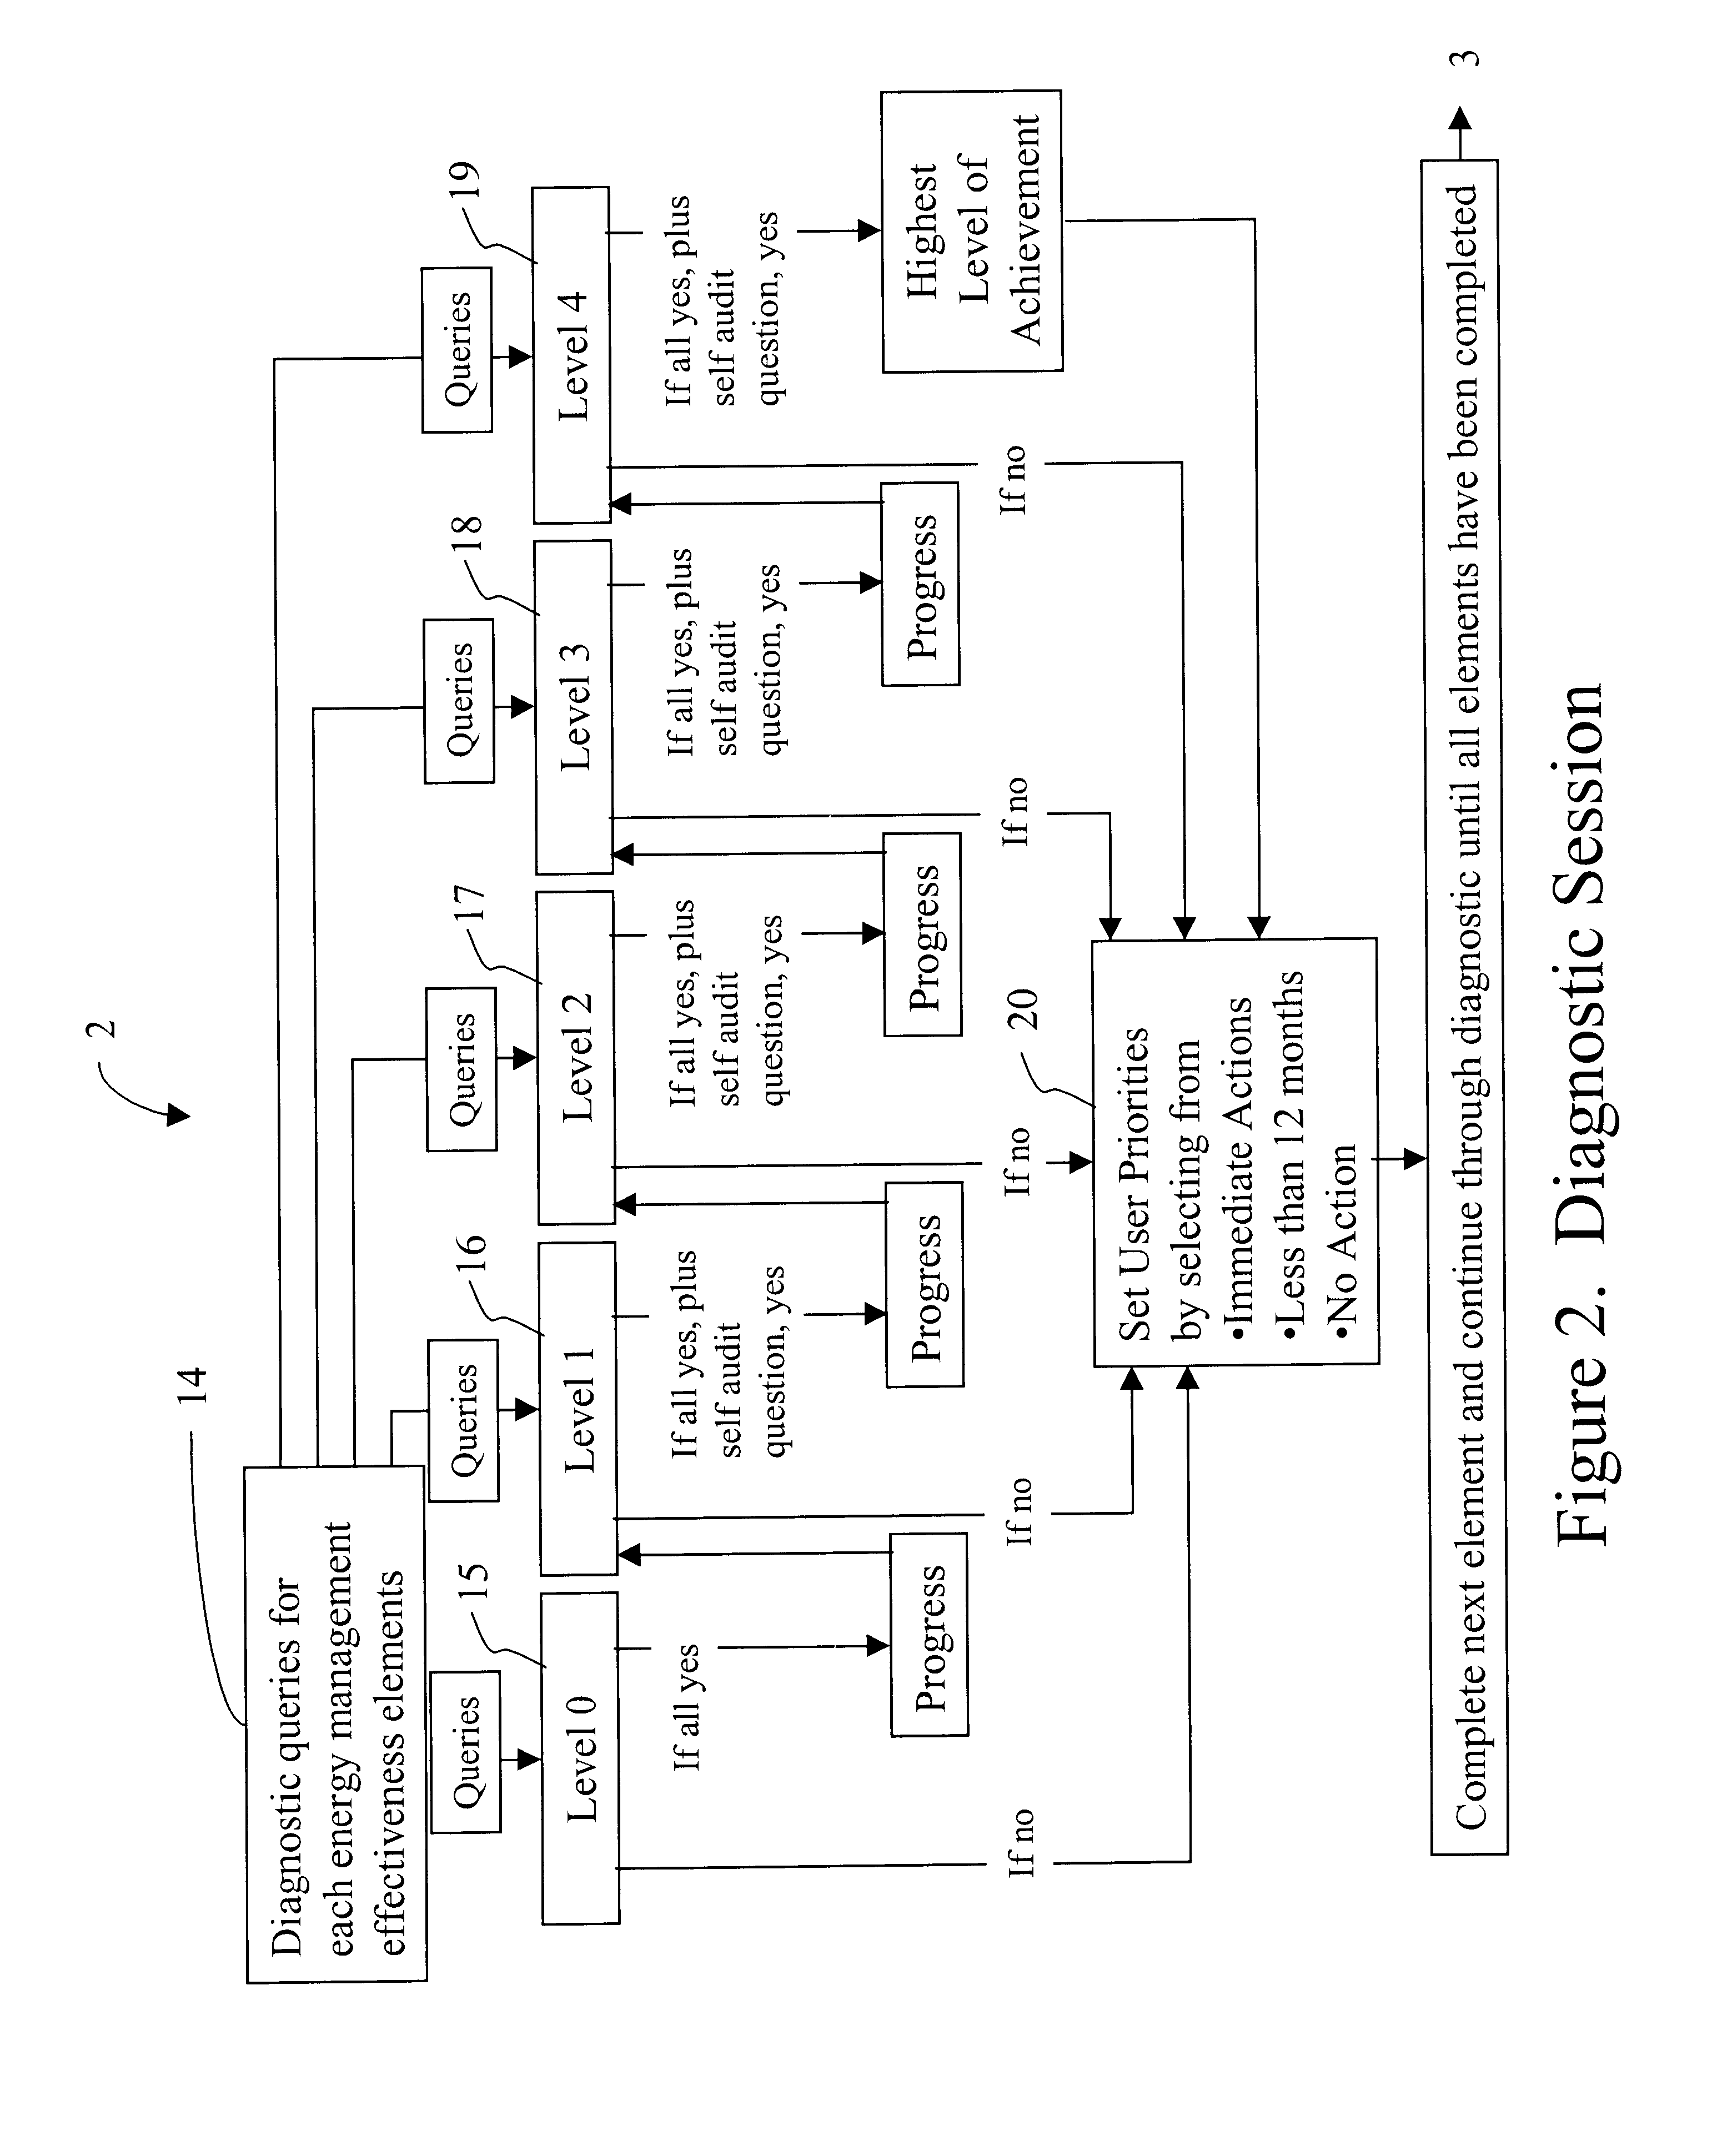 Computerized management system and method for energy performance evaluation and improvement